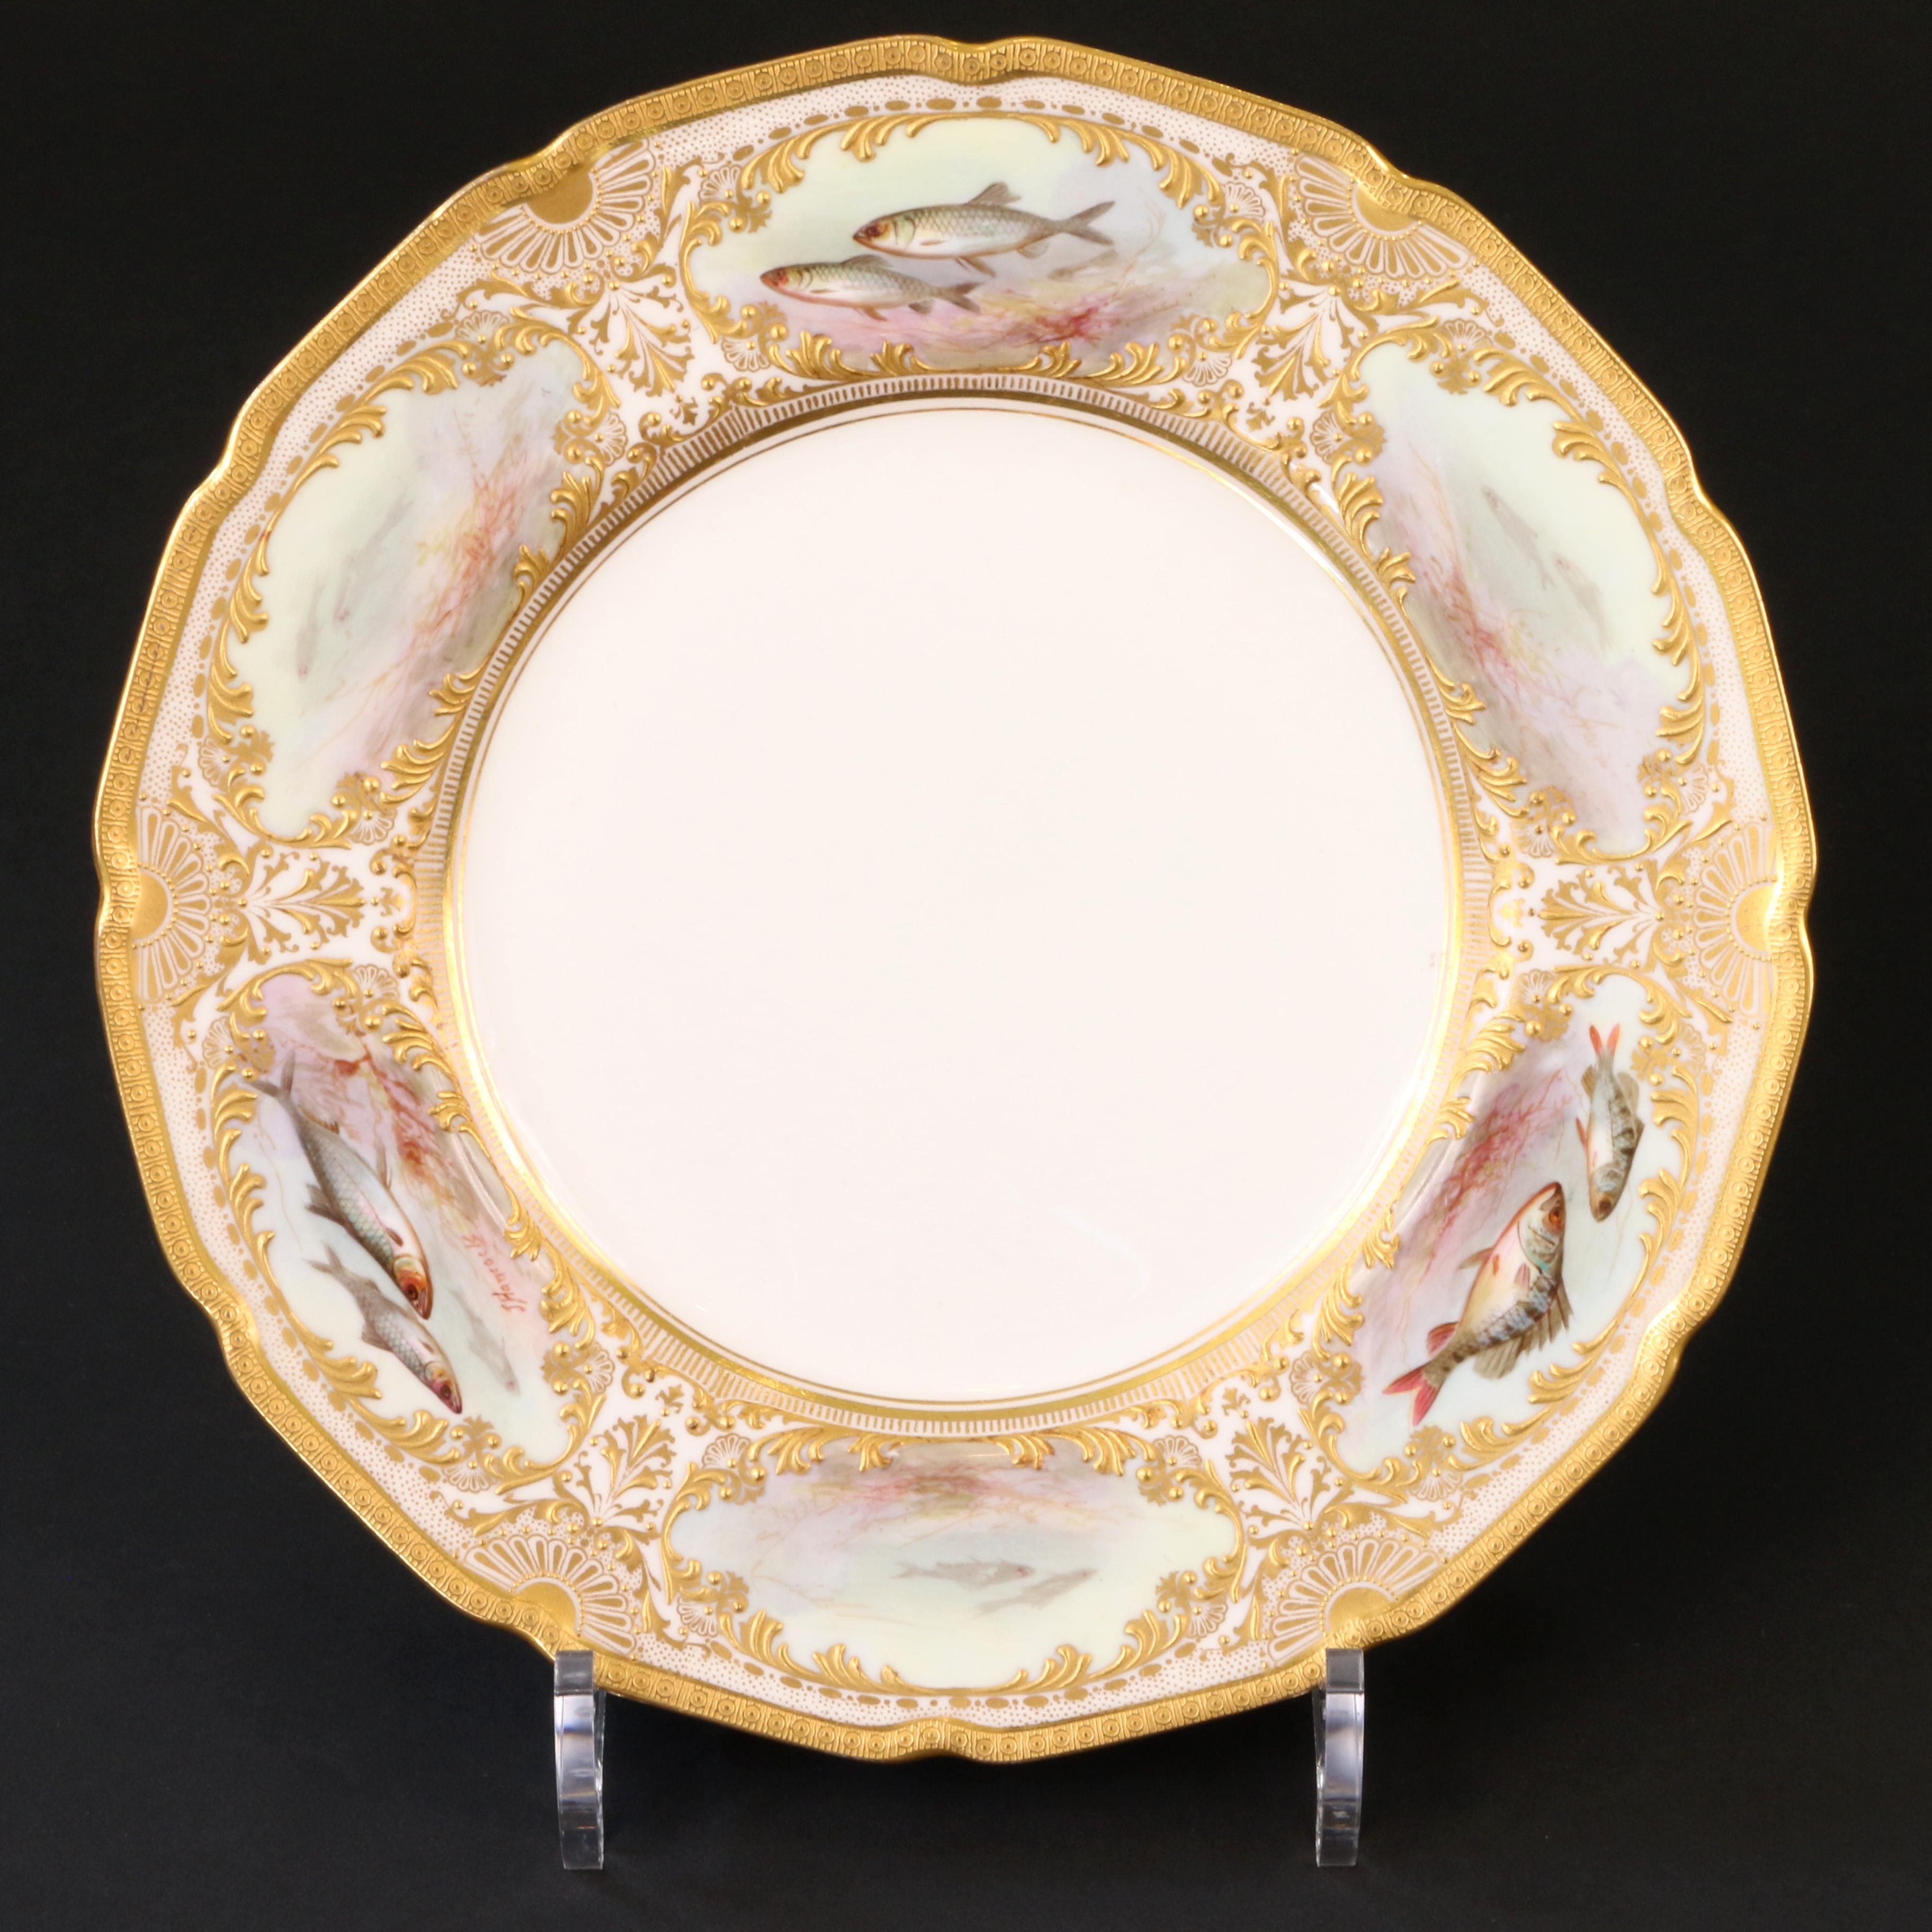 12 Royal Doulton Hand Painted and Heavily Gilded Fish Plates im Zustand „Hervorragend“ im Angebot in New York, NY